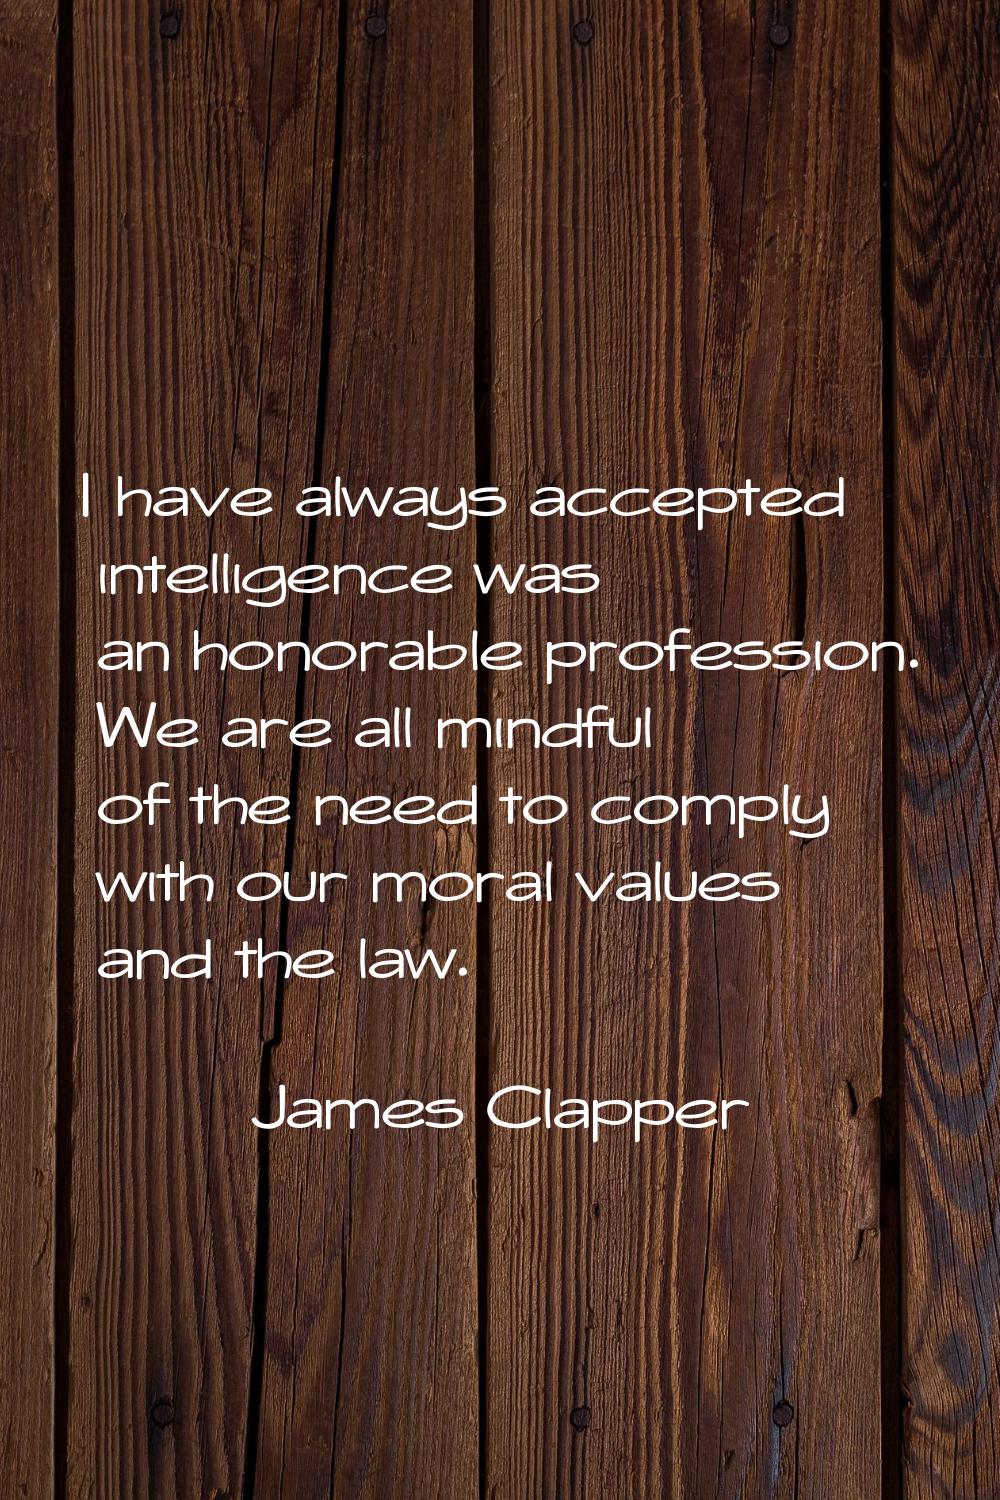 I have always accepted intelligence was an honorable profession. We are all mindful of the need to 